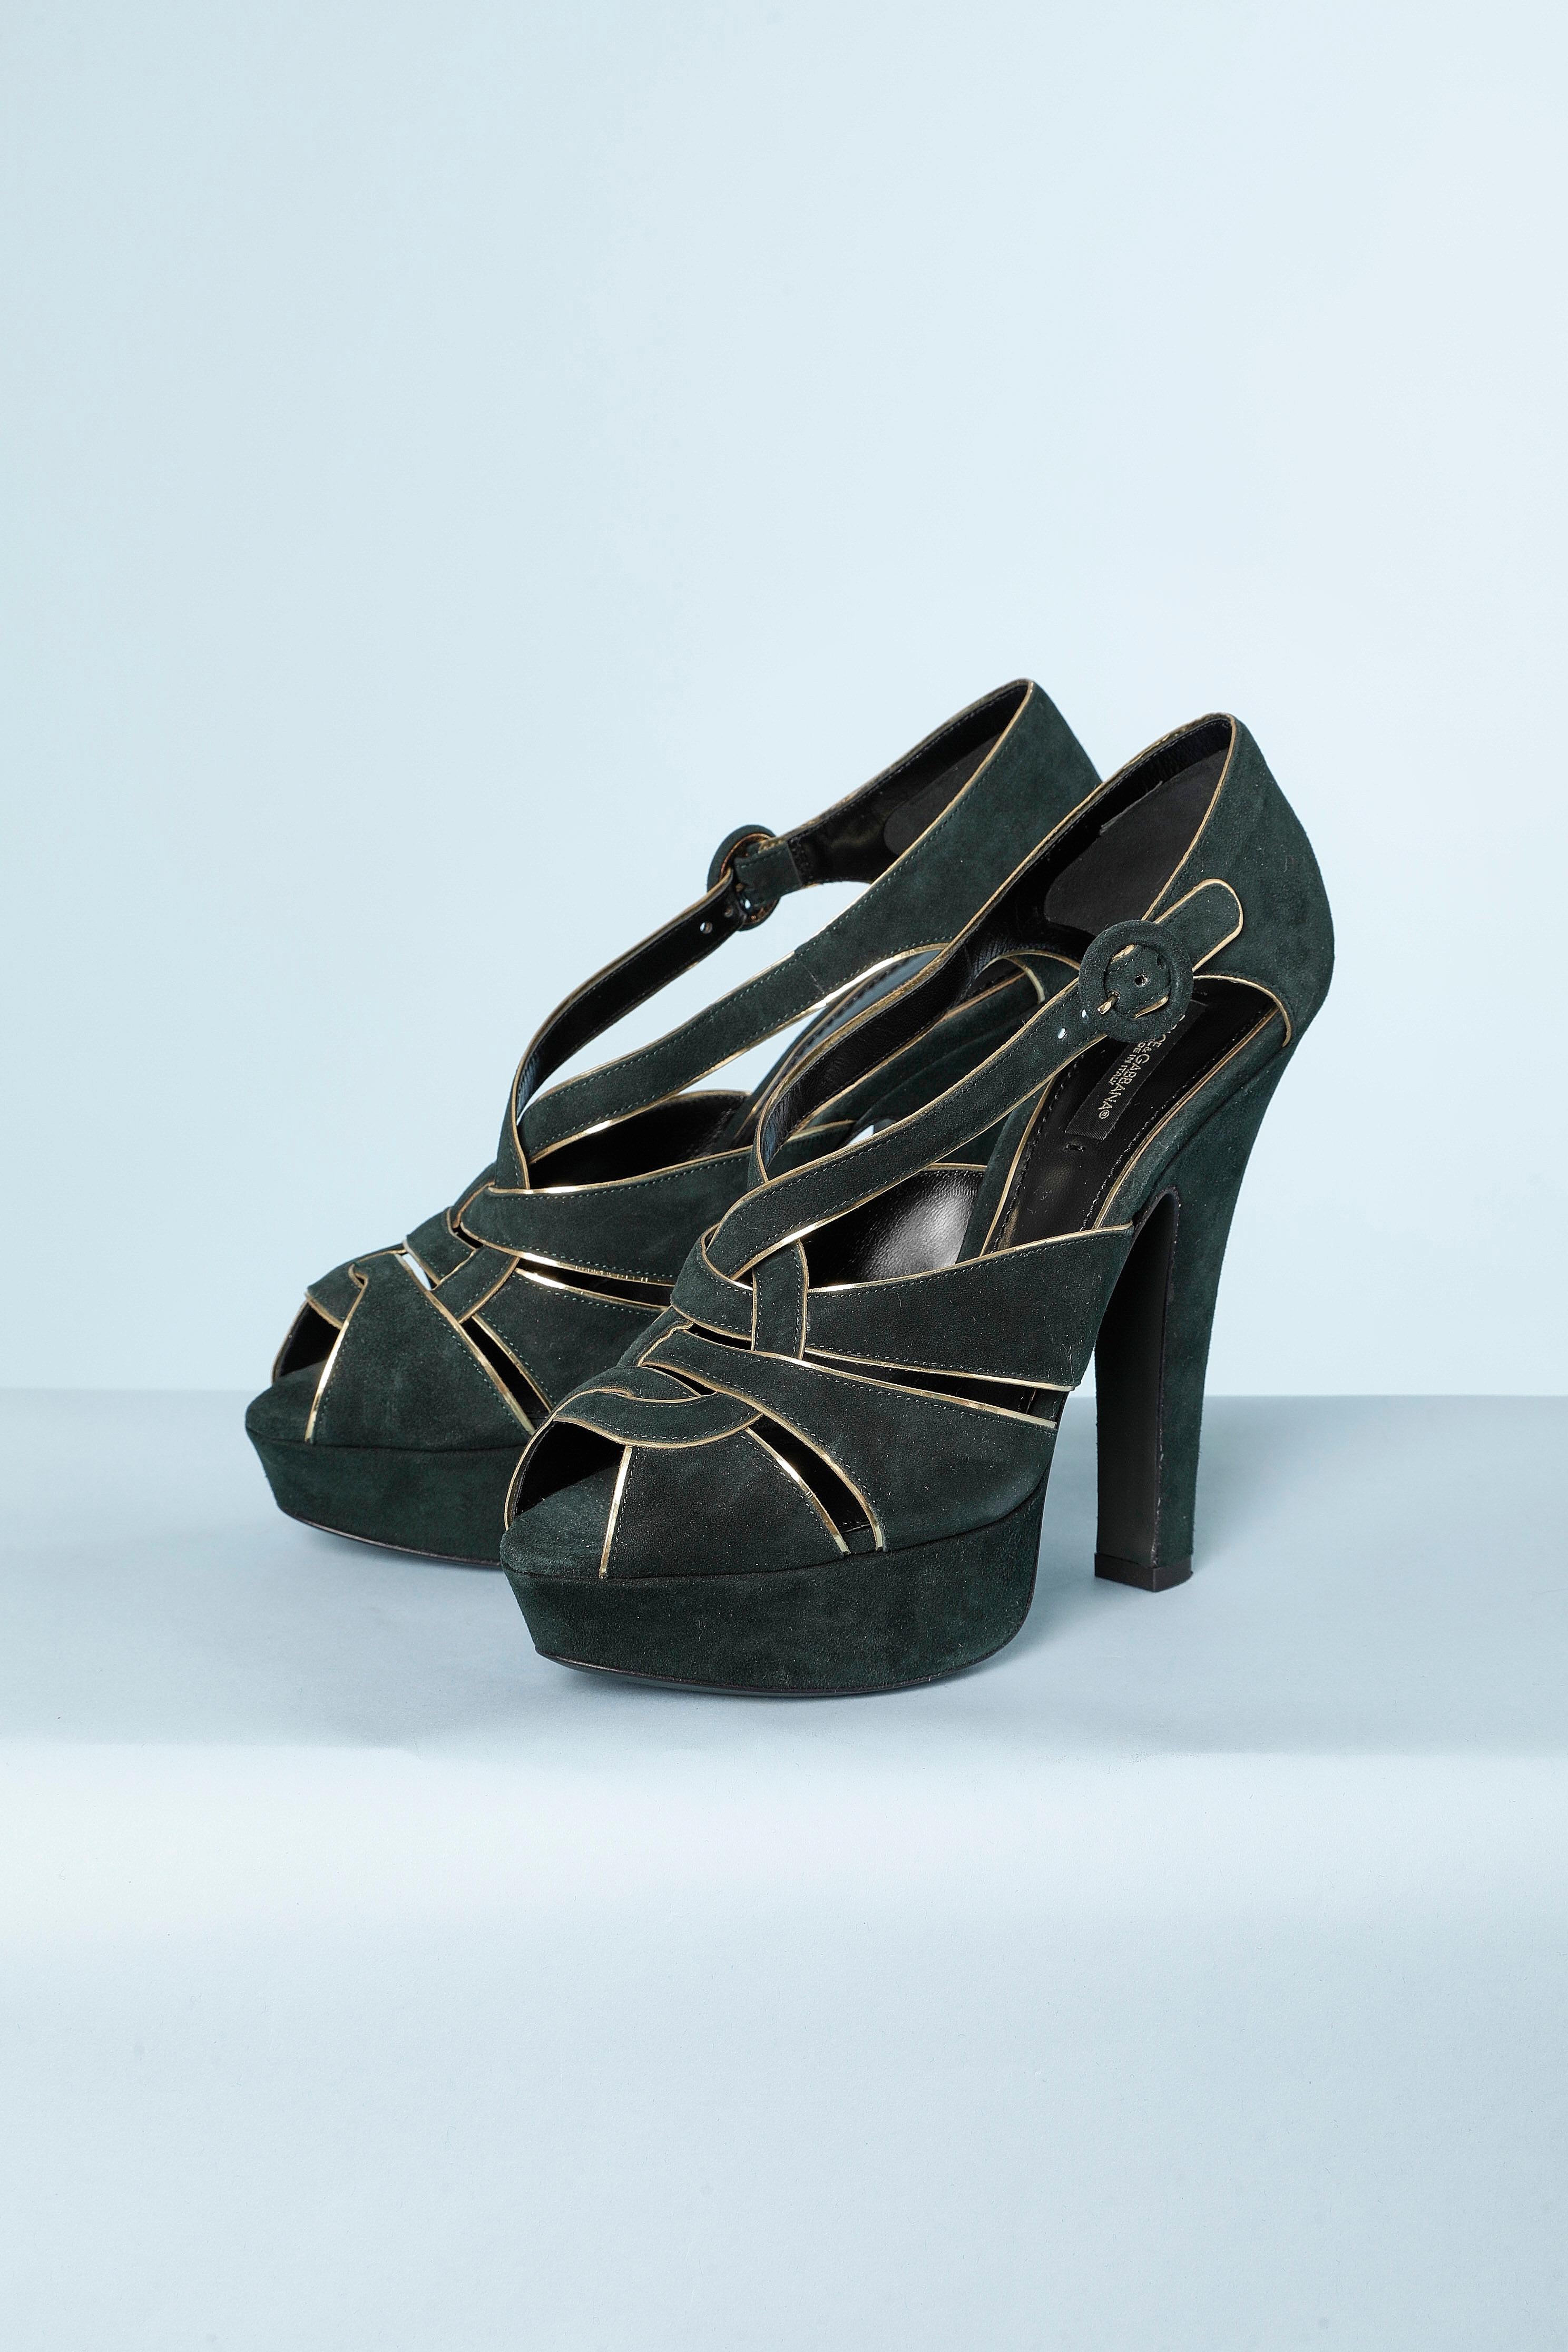 Platform sandal in green suede and gold piping.
Height of the heels= 13 cm 
Height of the platform= 3 cm
 Shoe size= 38 1/2 (Italian size) 
NEW